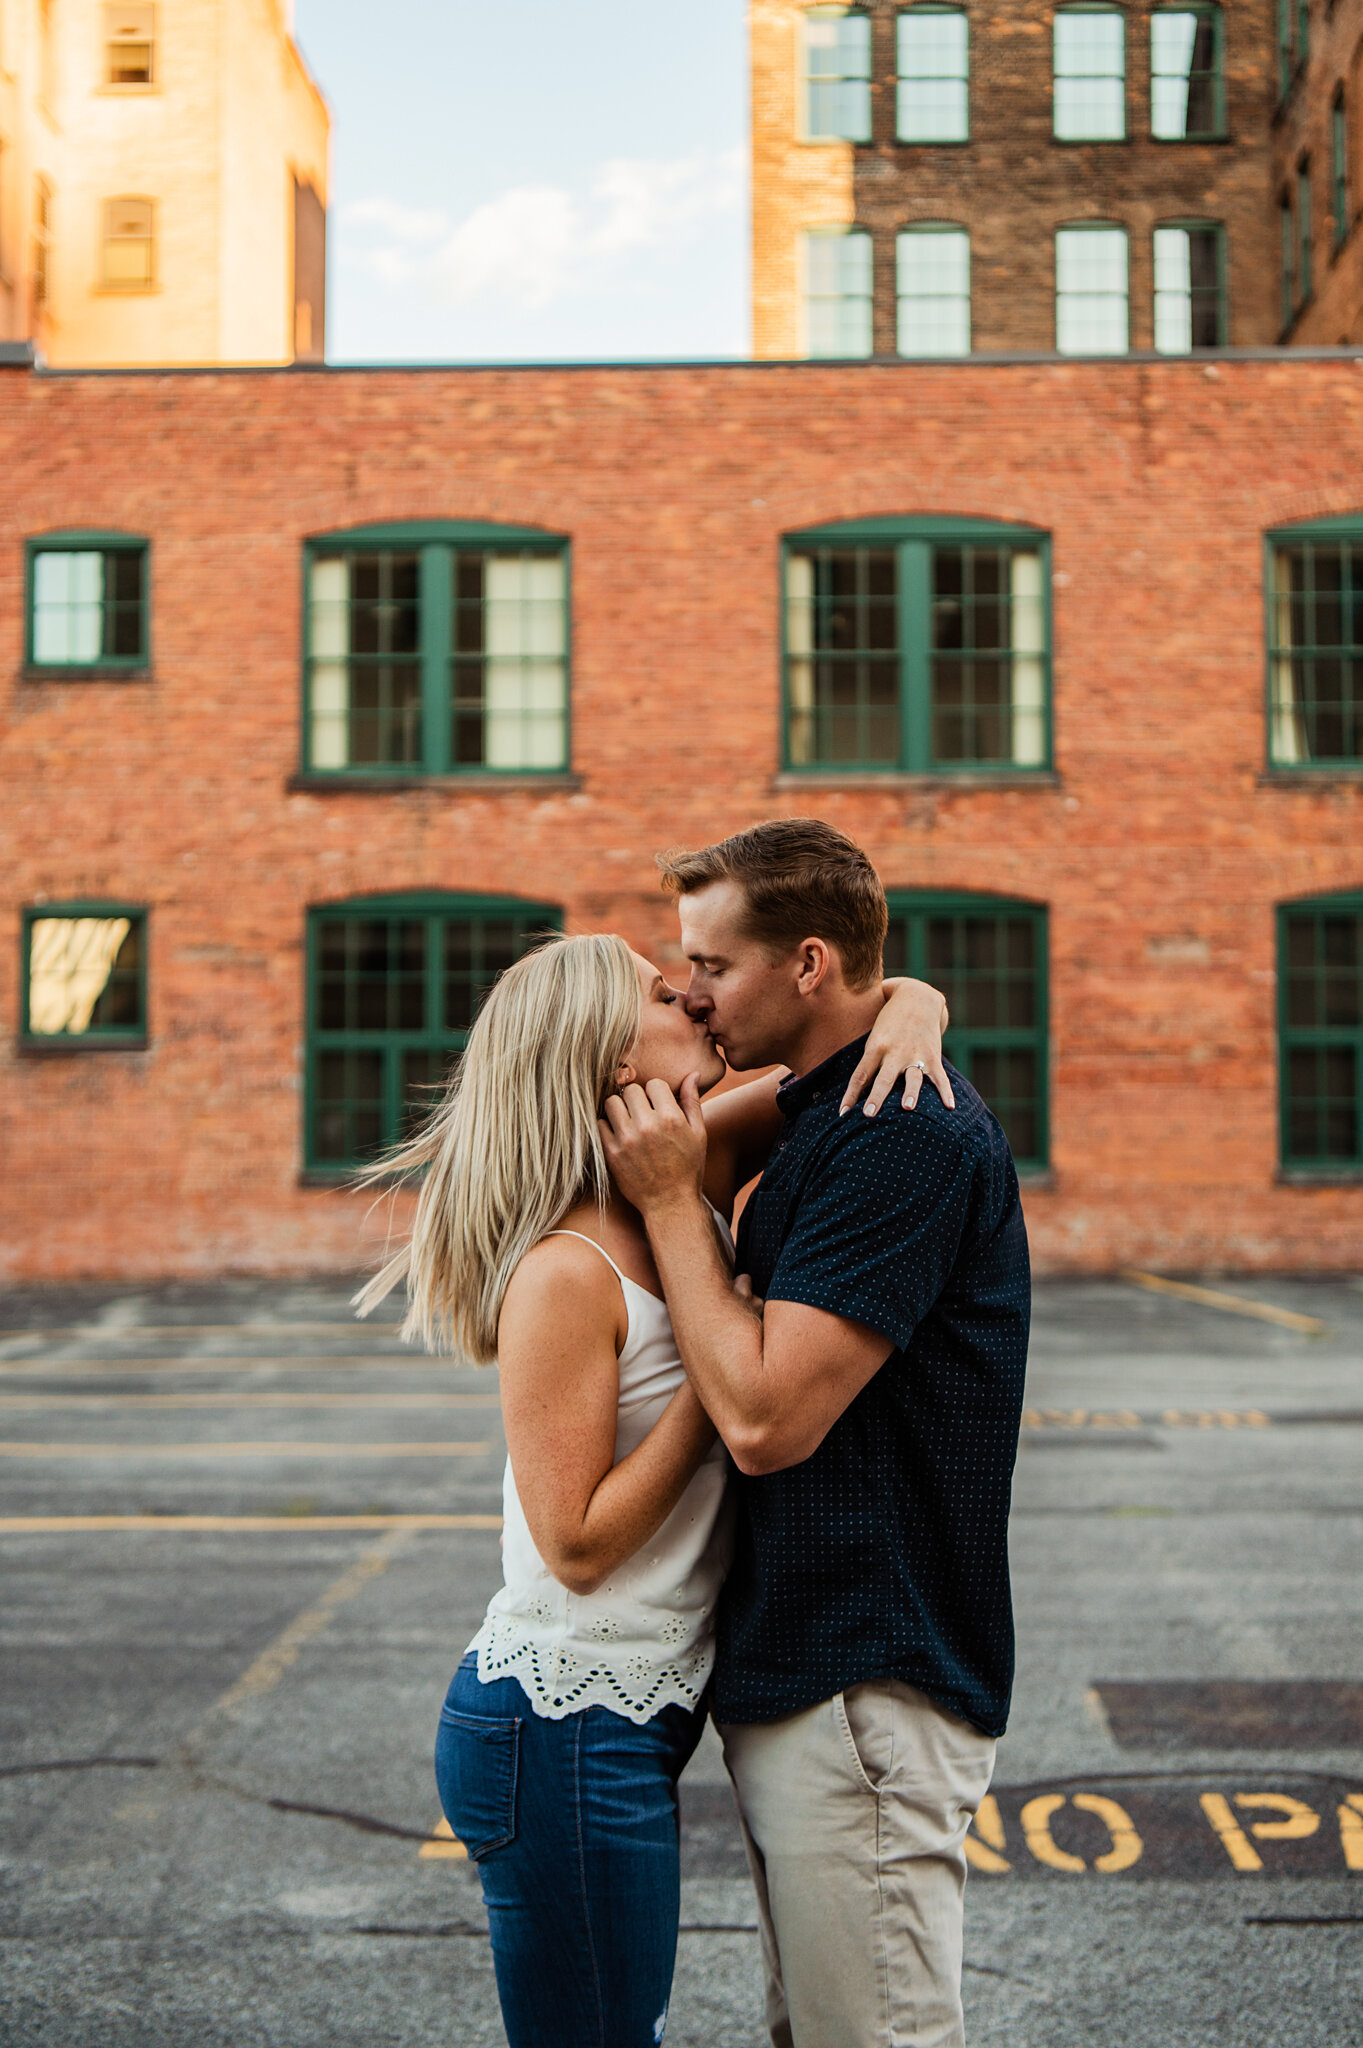 Genesee_Brew_House_High_Falls_Rochester_Engagement_Session_JILL_STUDIO_Rochester_NY_Photographer_5512.jpg